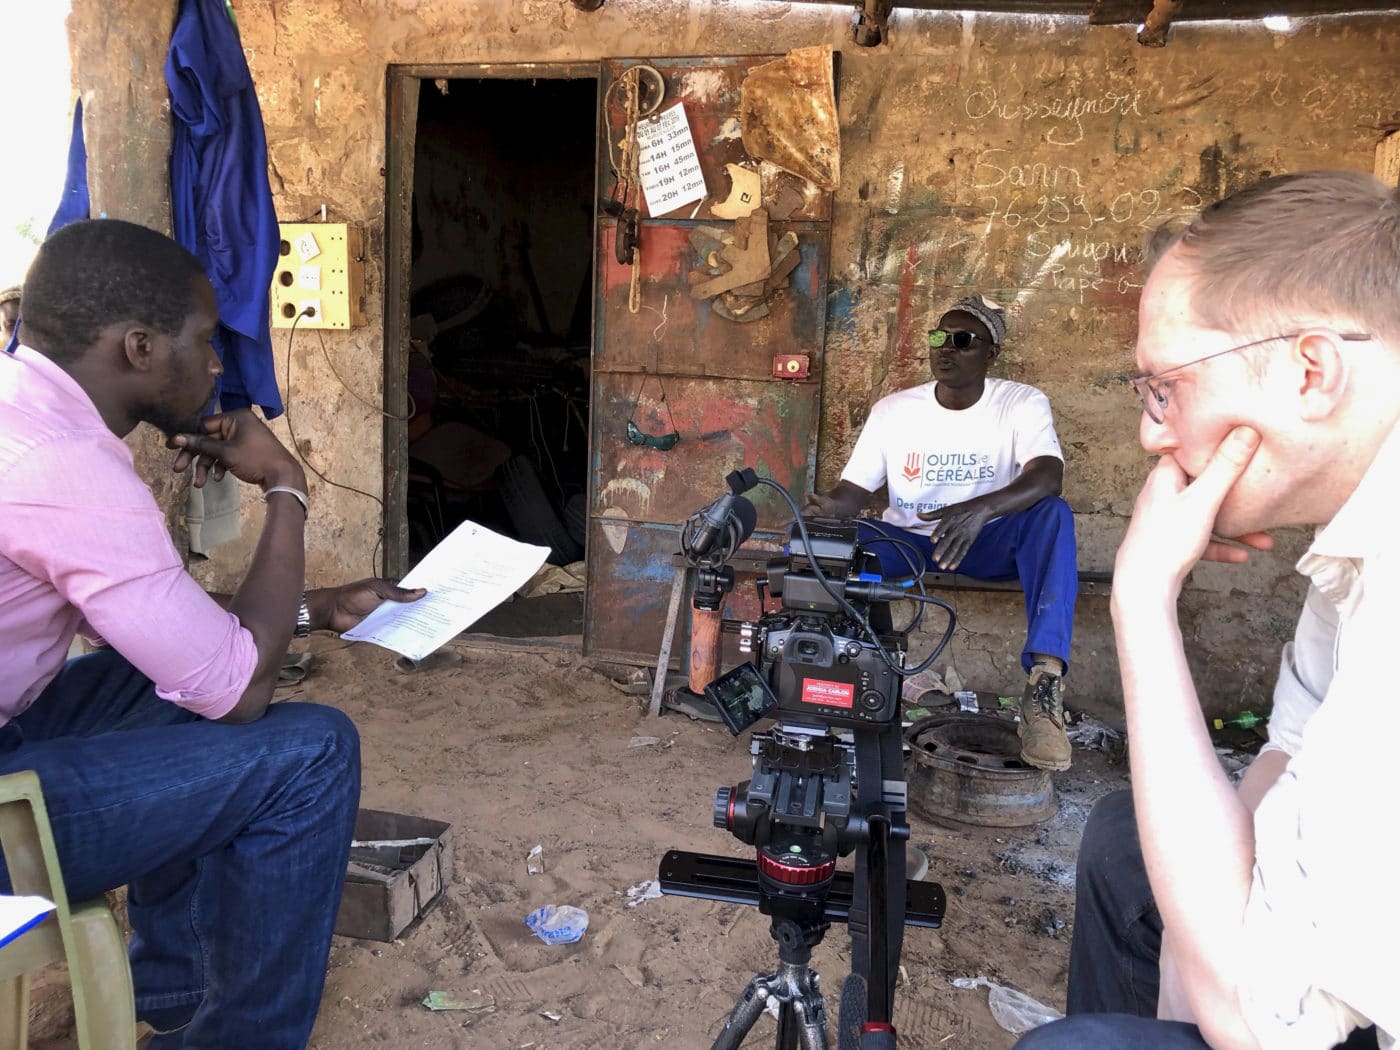 Behind-the-scenes of recent marketing video shoot on location in Senegal with local translator and Minneapolis-based videographer.